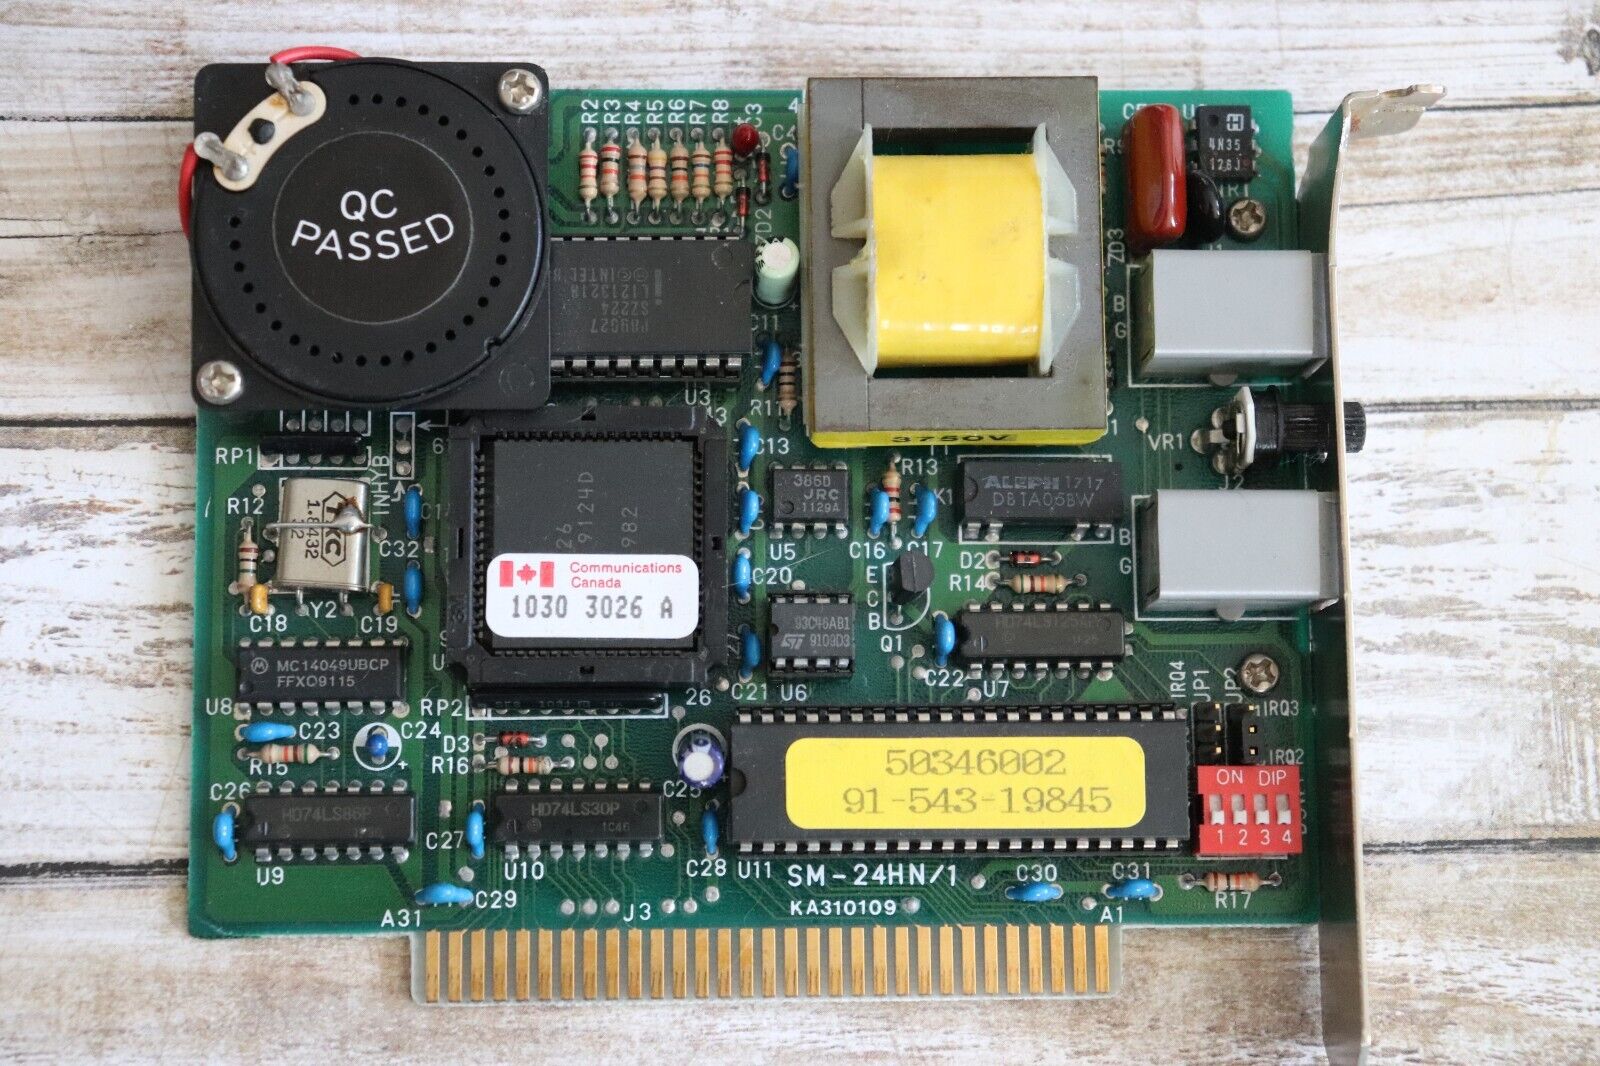 Vintage Modem Speaker Card from Logic LCS 286 Computer -AS IS- old PC parts 80s